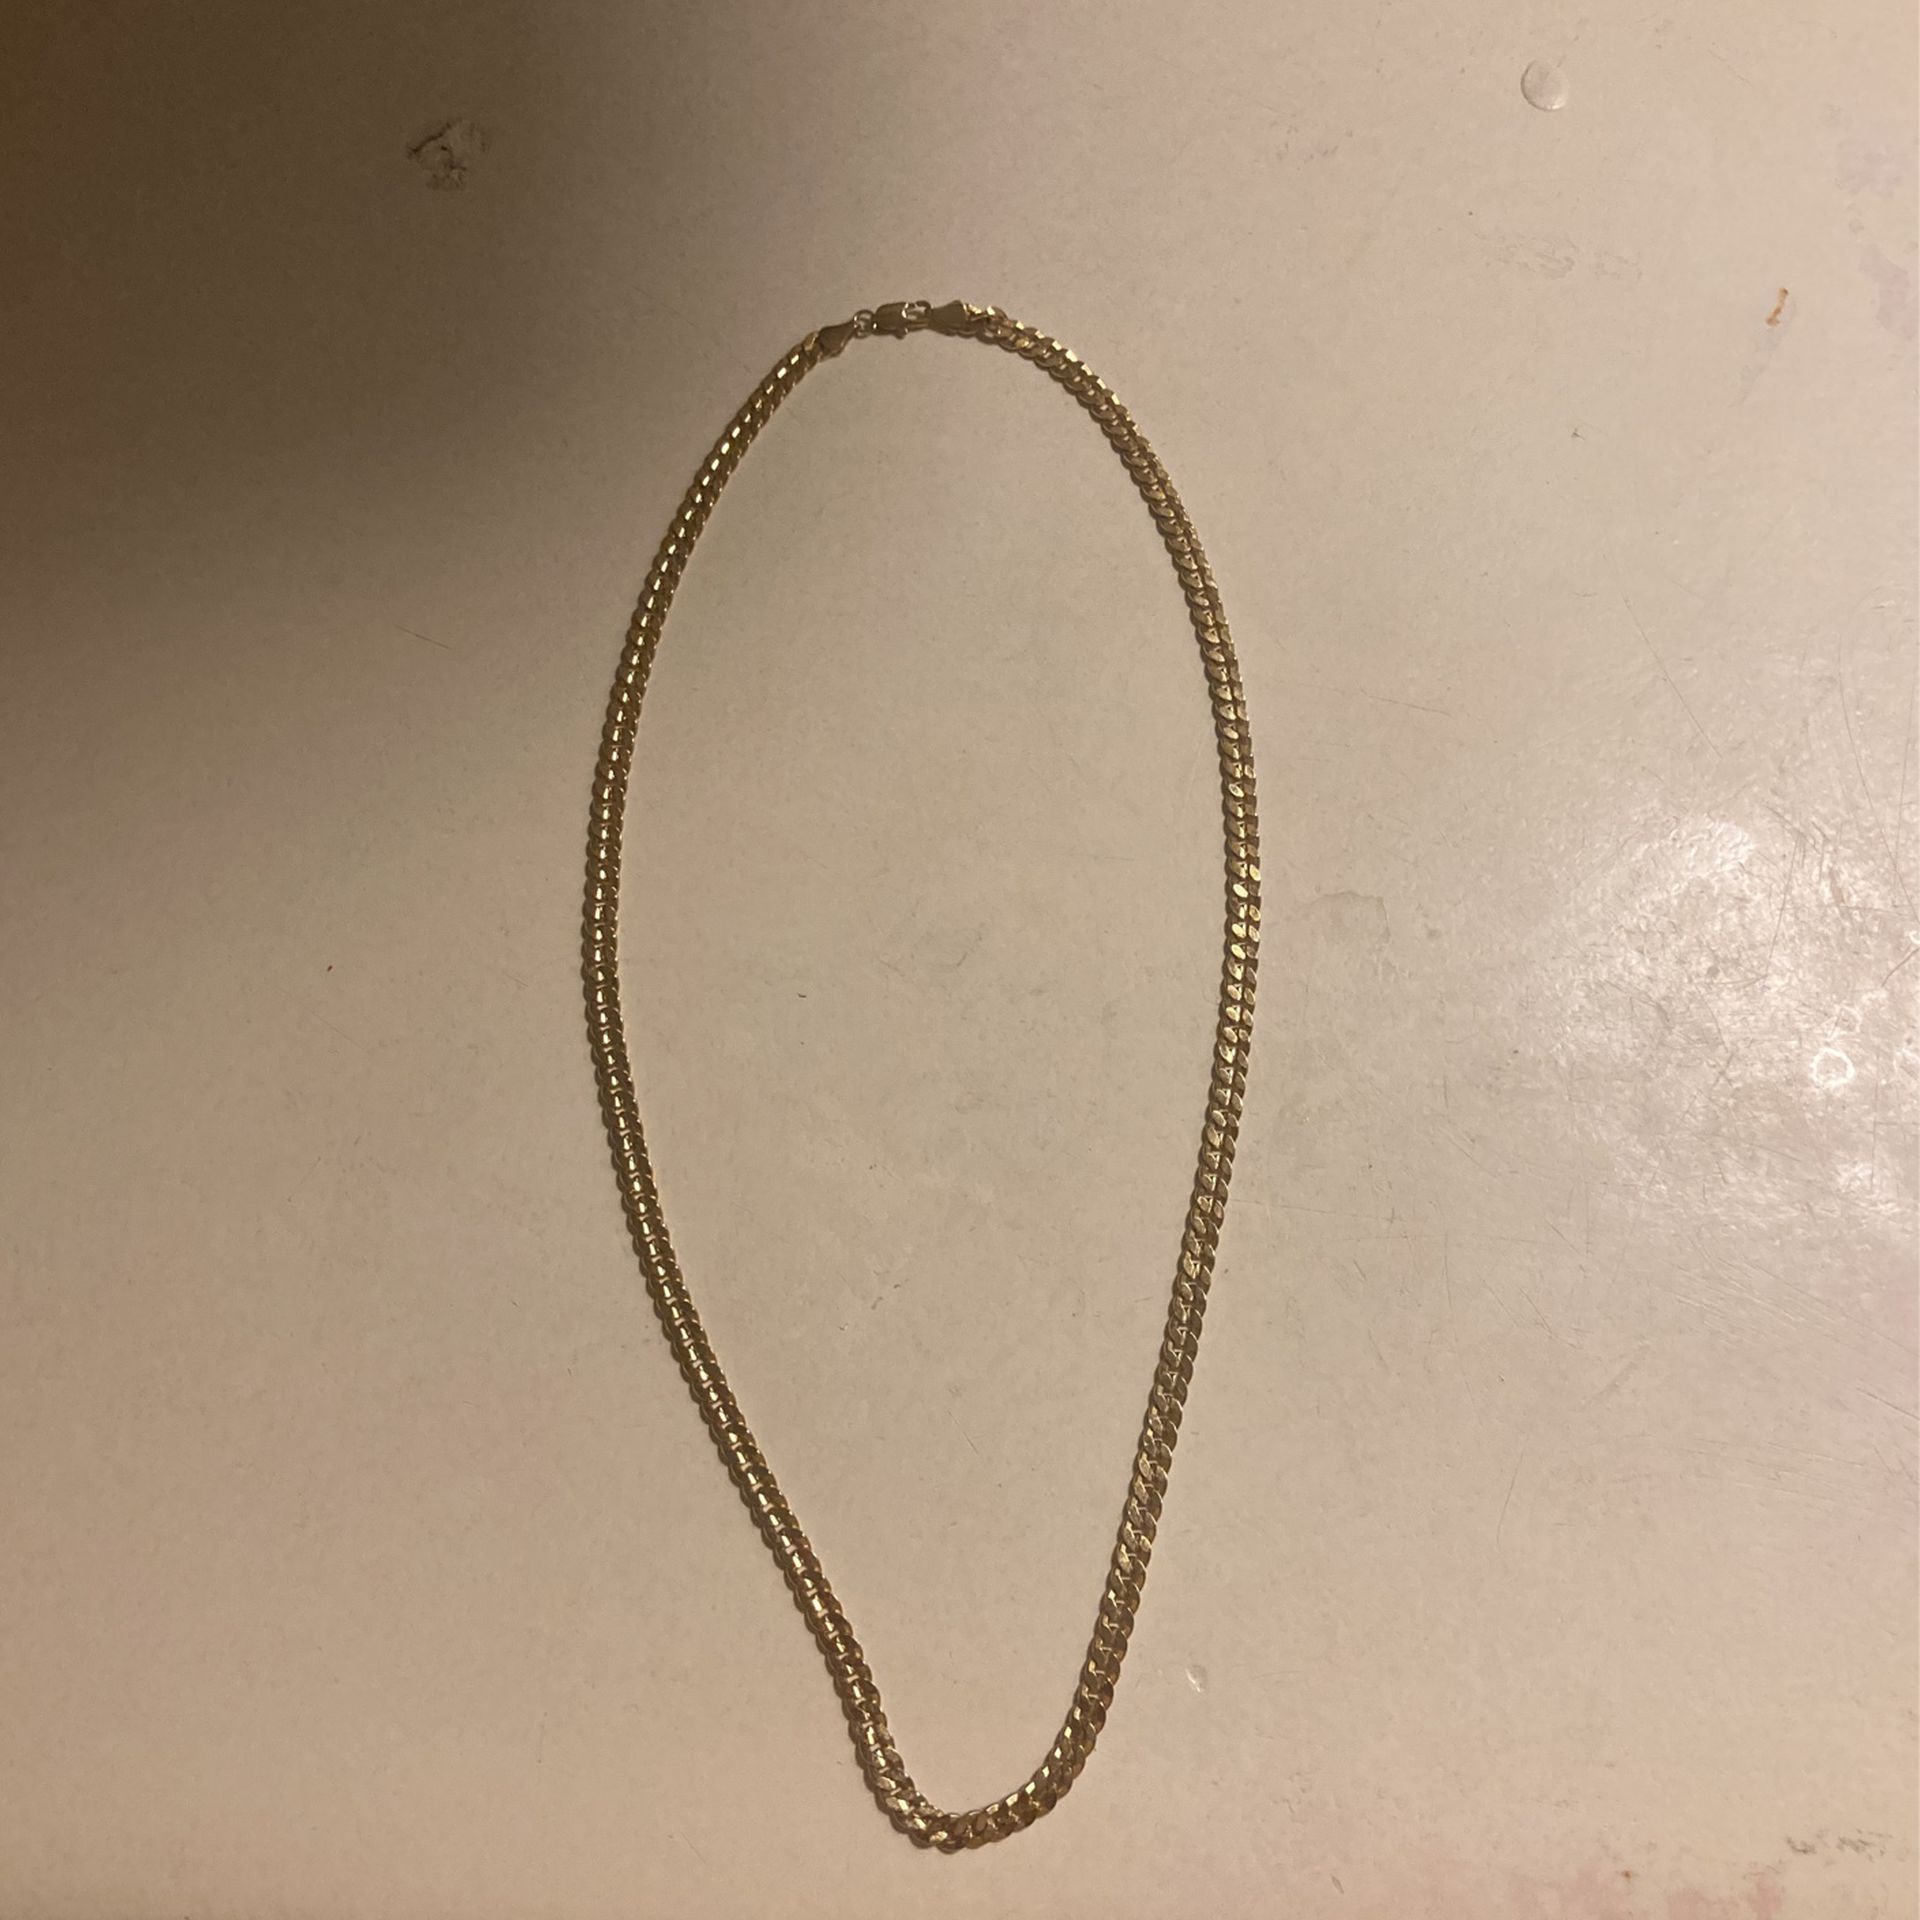 14k Gold Chain for Sale in Oklahoma City, OK - OfferUp